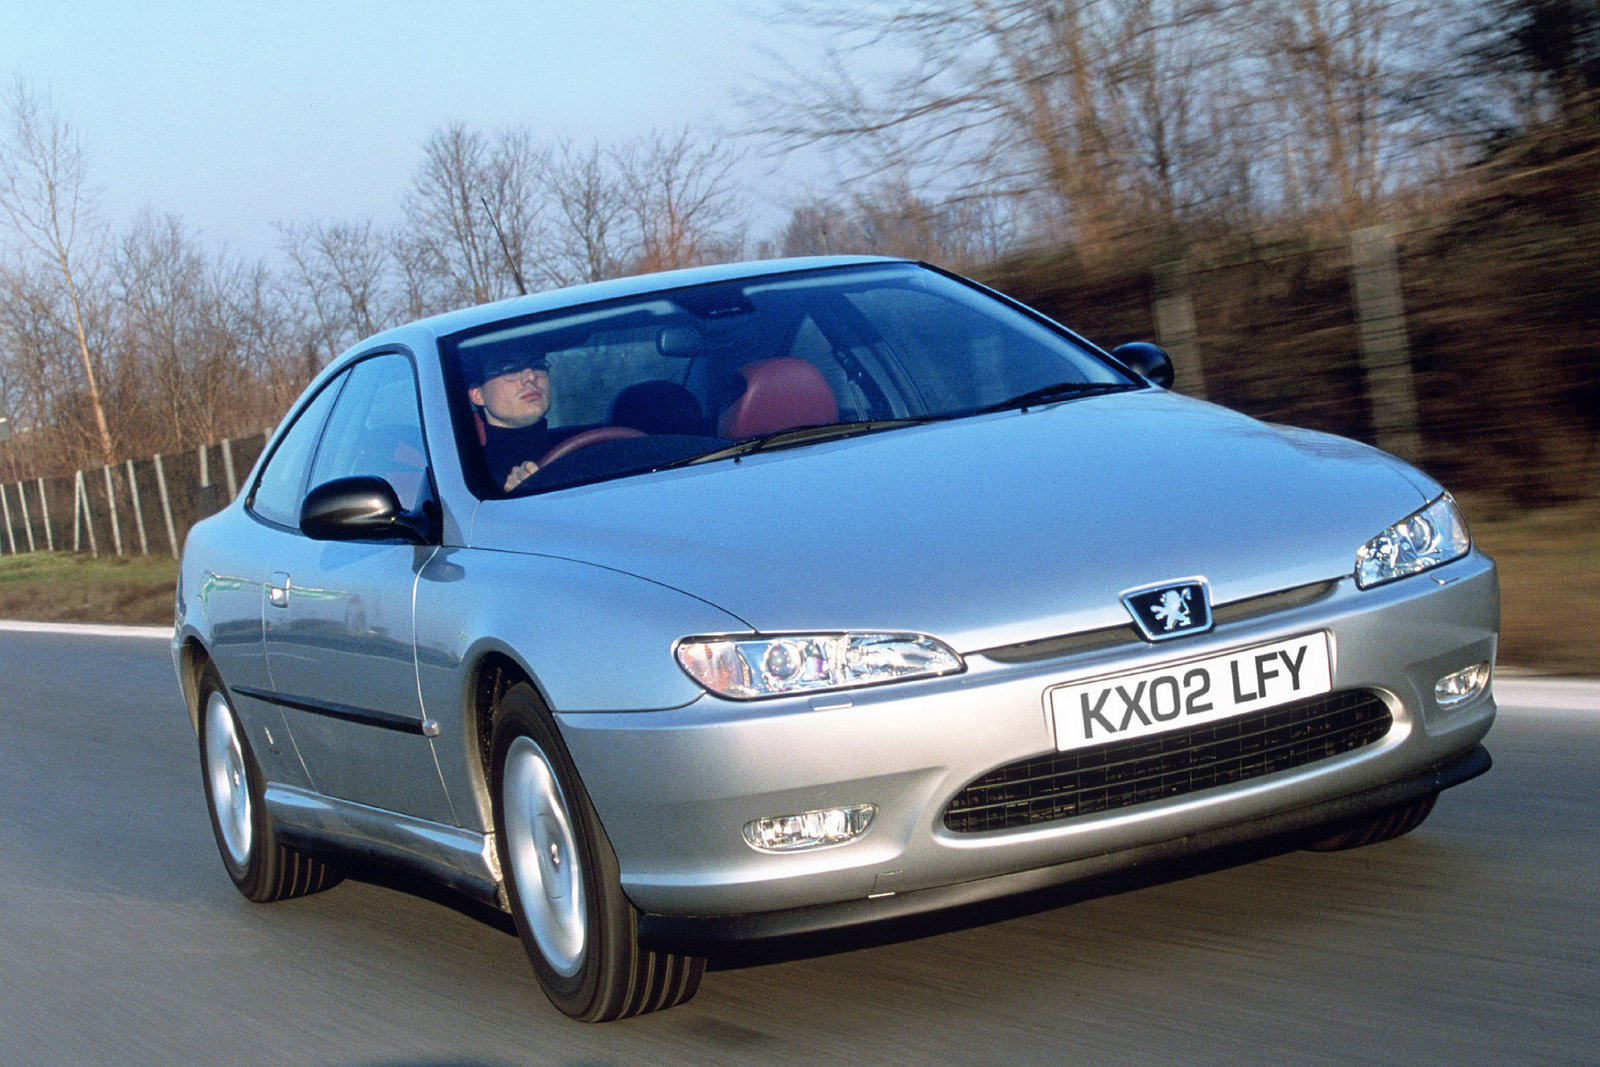 Peugeot 406 Coupé Club Celebrates Three Anniversaries with Special